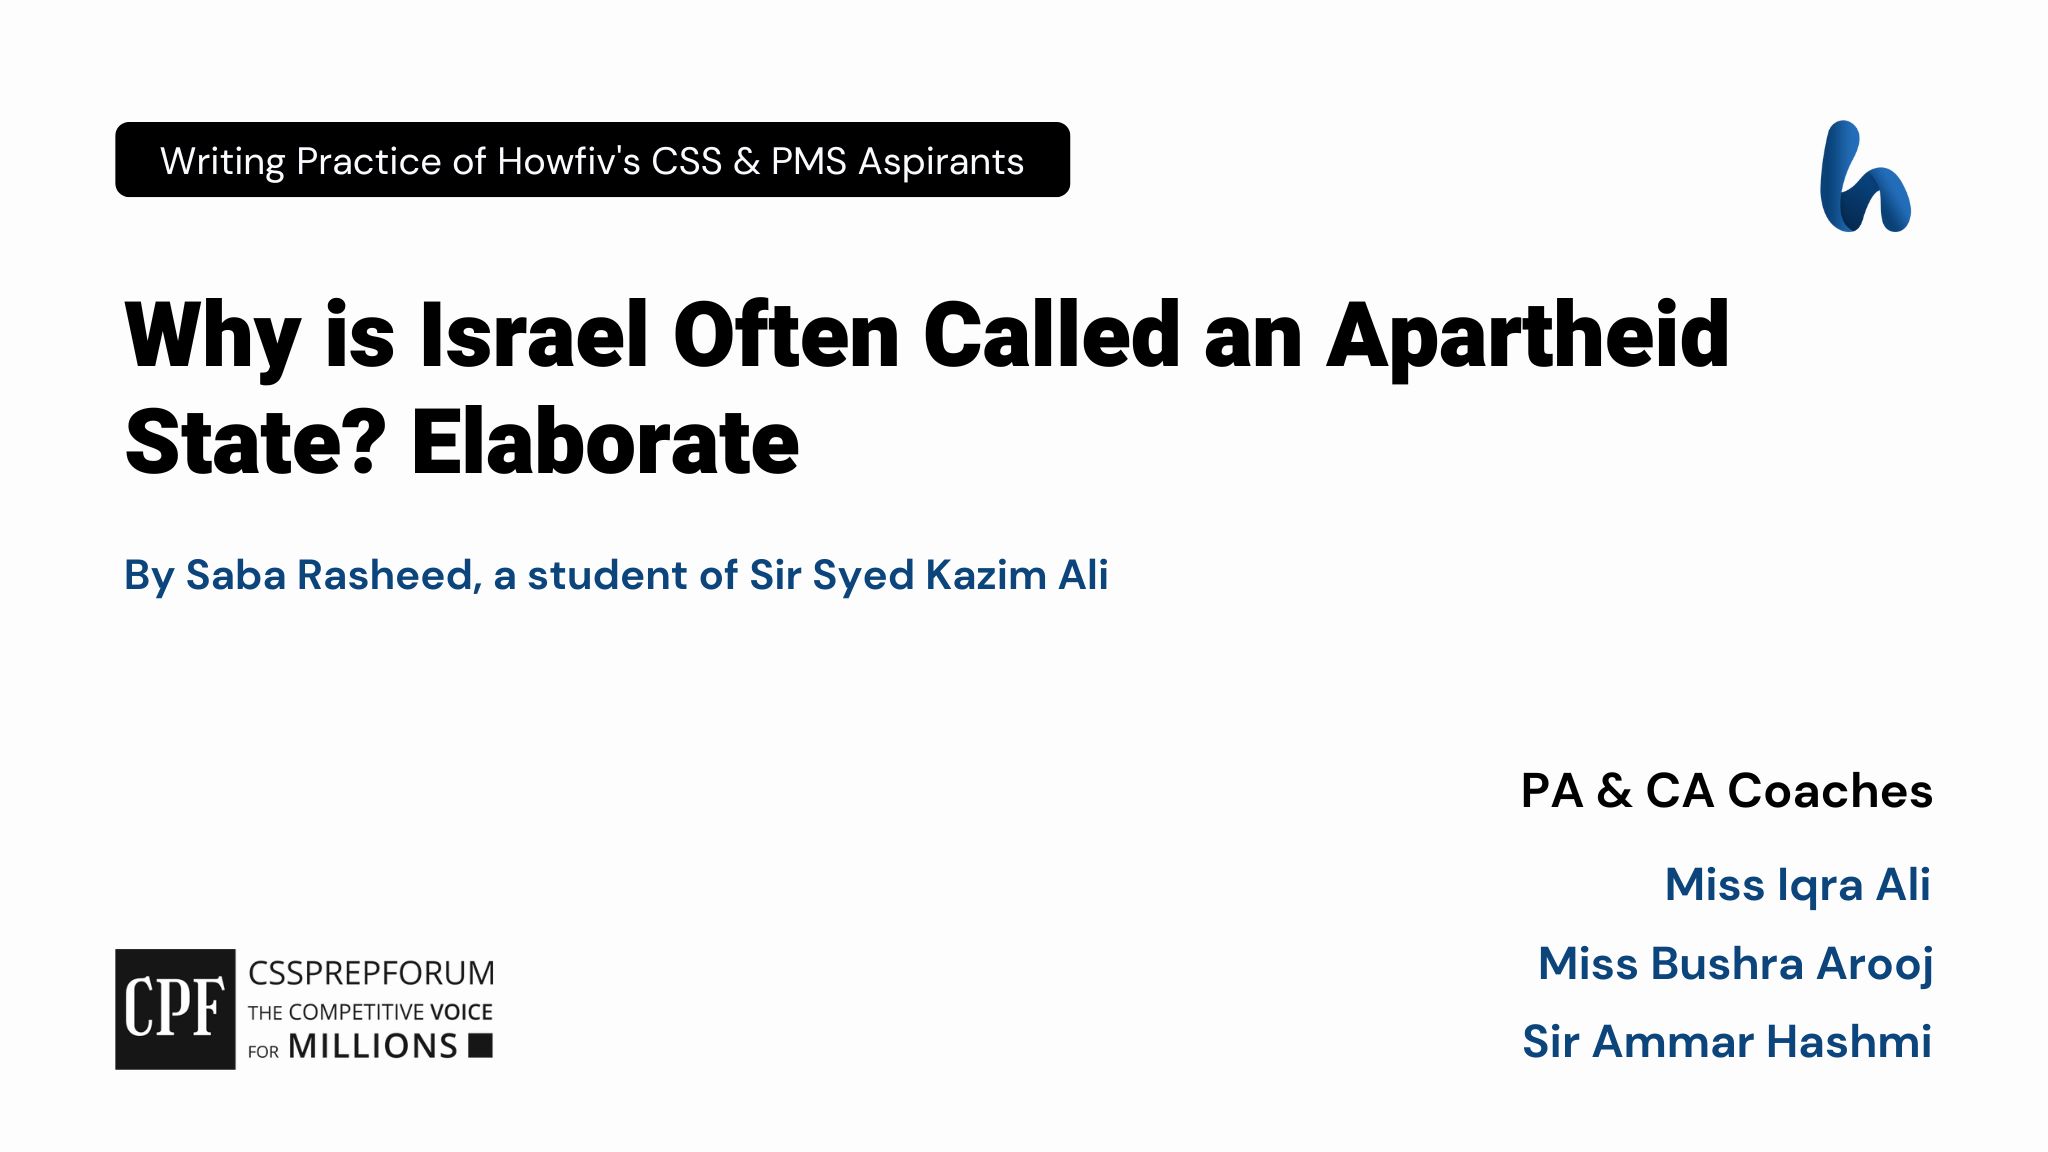 Why is Israel Often Called an Apartheid State? Elaborate